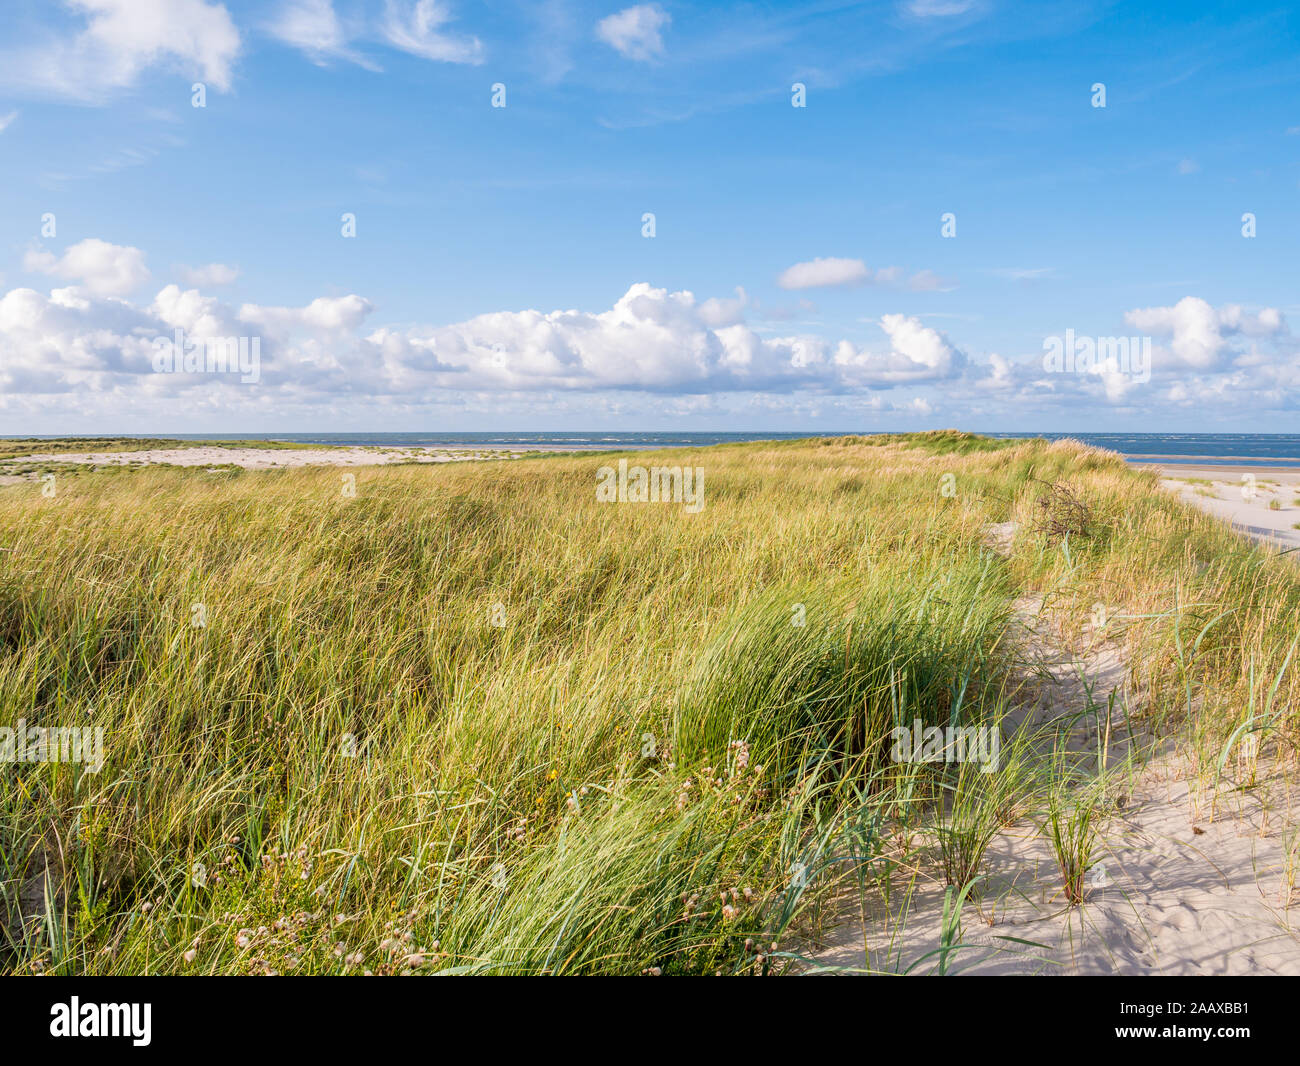 View to North Sea from dunes with marram grass and beach of nature reserve Boschplaat on Frisian island Terschelling, Netherlands Stock Photo